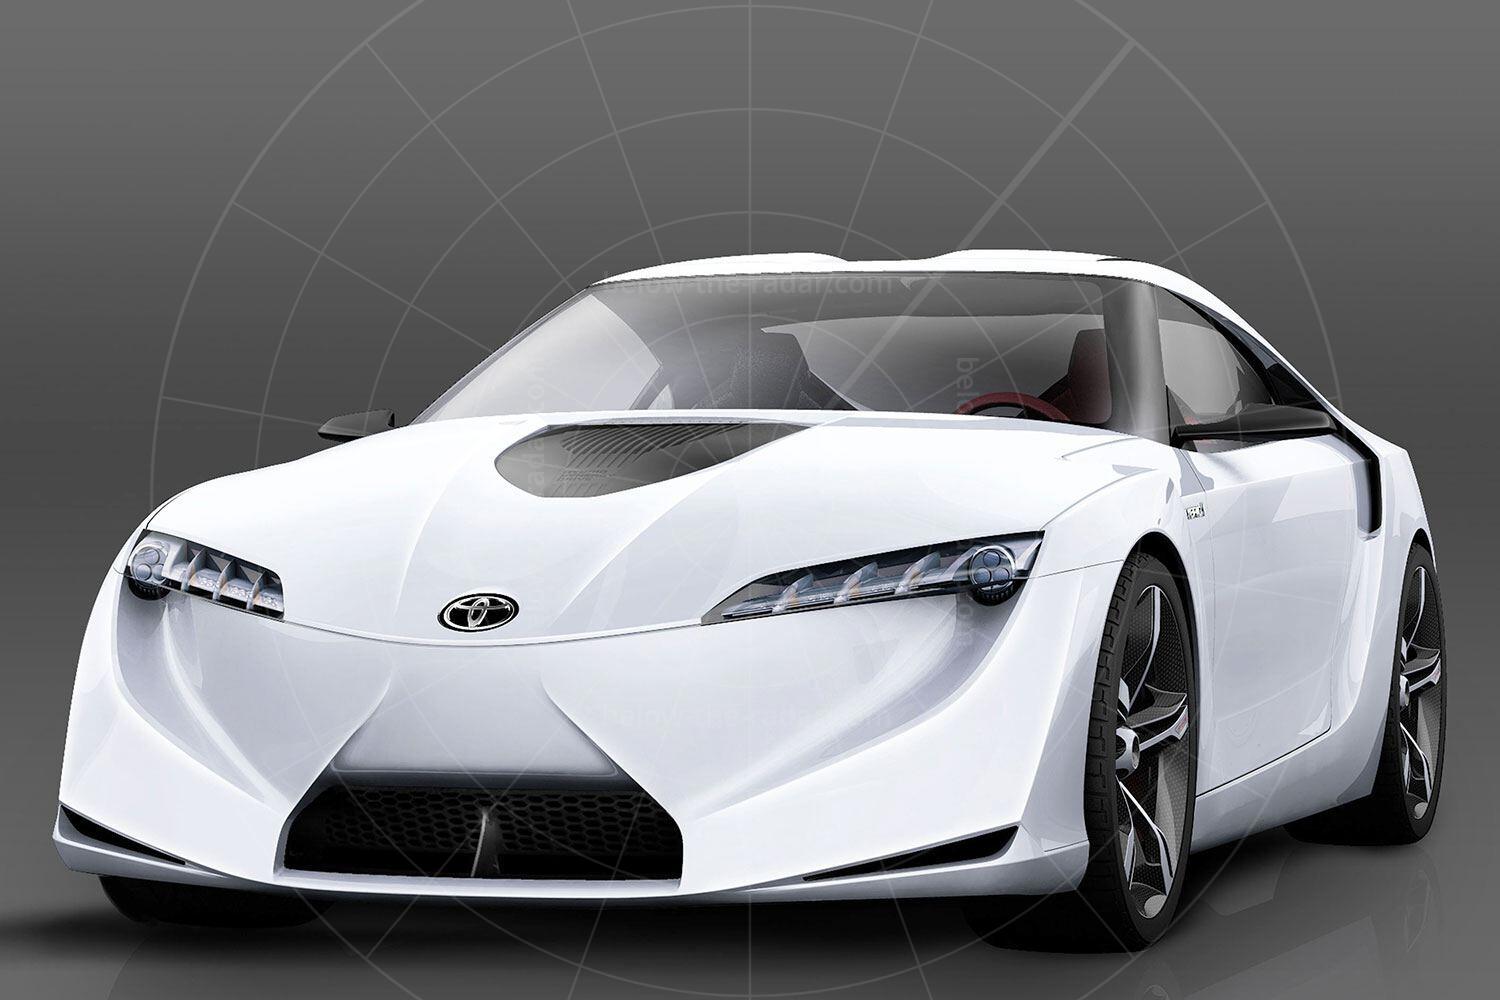 Toyota FT-HS concept Pic: Toyota | Toyota FT-HS concept